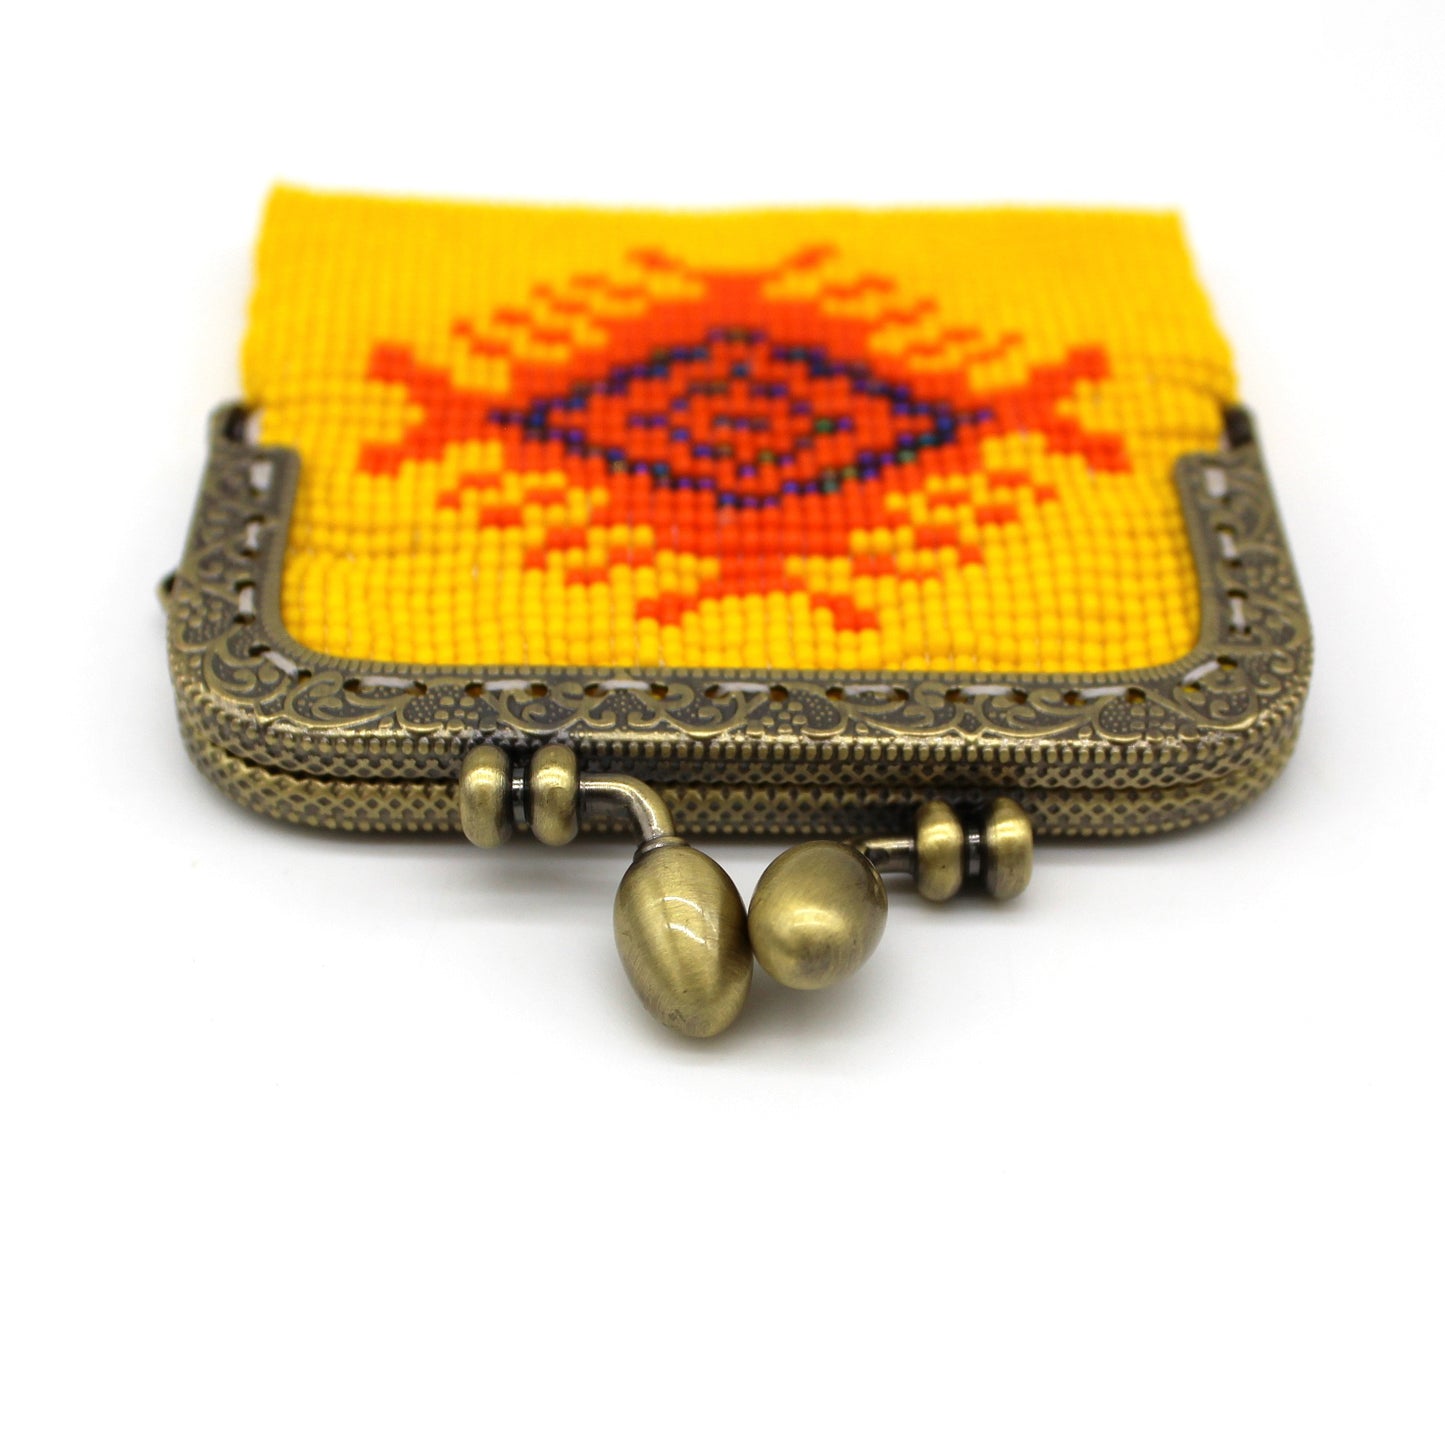 Glass bead coin purse with metal frame - Yellow Eye